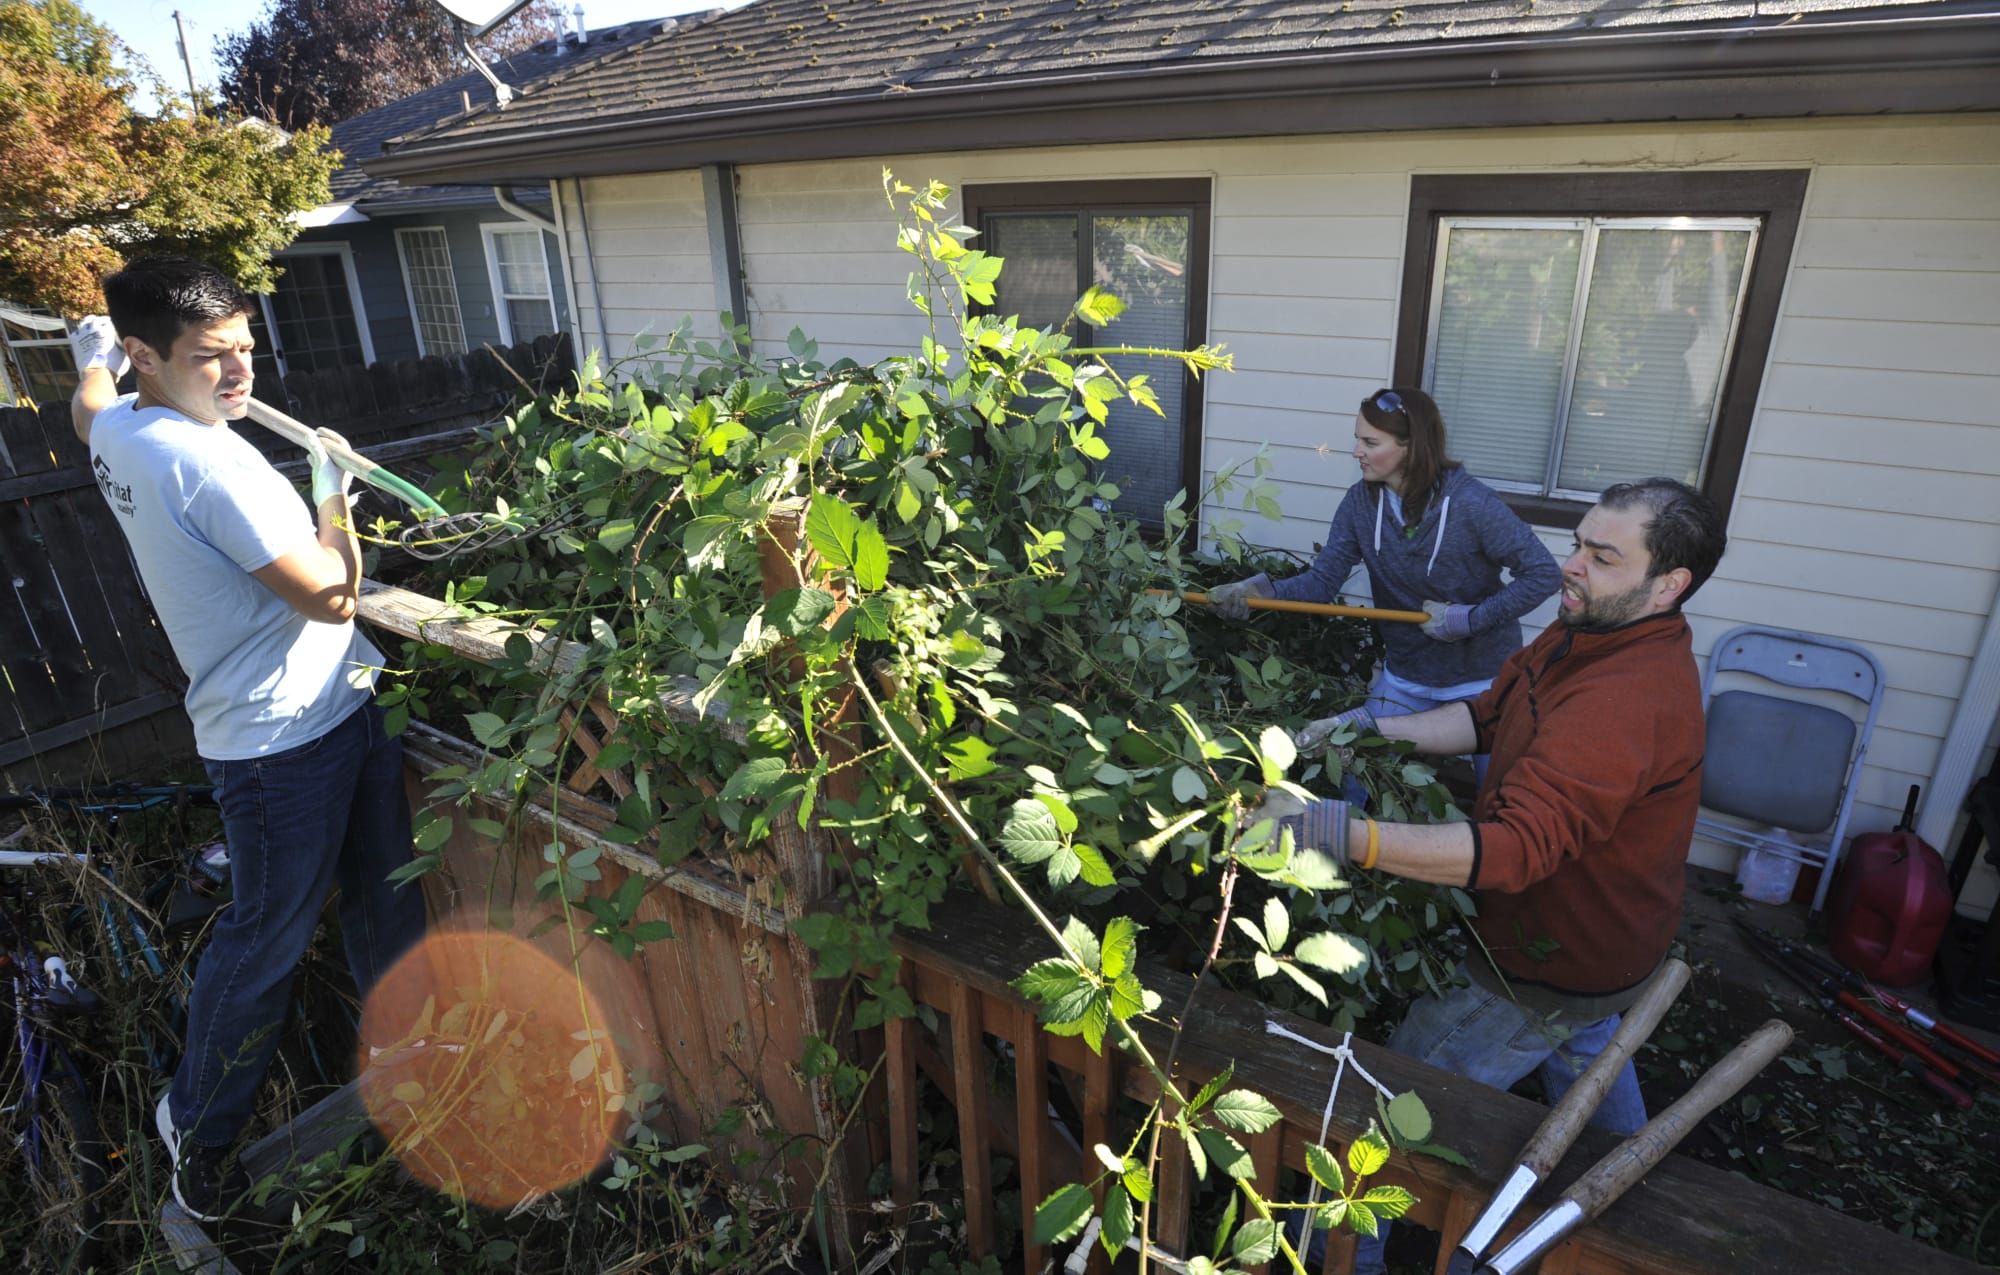 Jesse Lancaster, left, Jennifer Amsler and Andrew Swan remove blackberries Saturday as part of a volunteer effort through Evergreen Habitat for Humanity that focused on low-income homes in the Fruit Valley neighborhood.